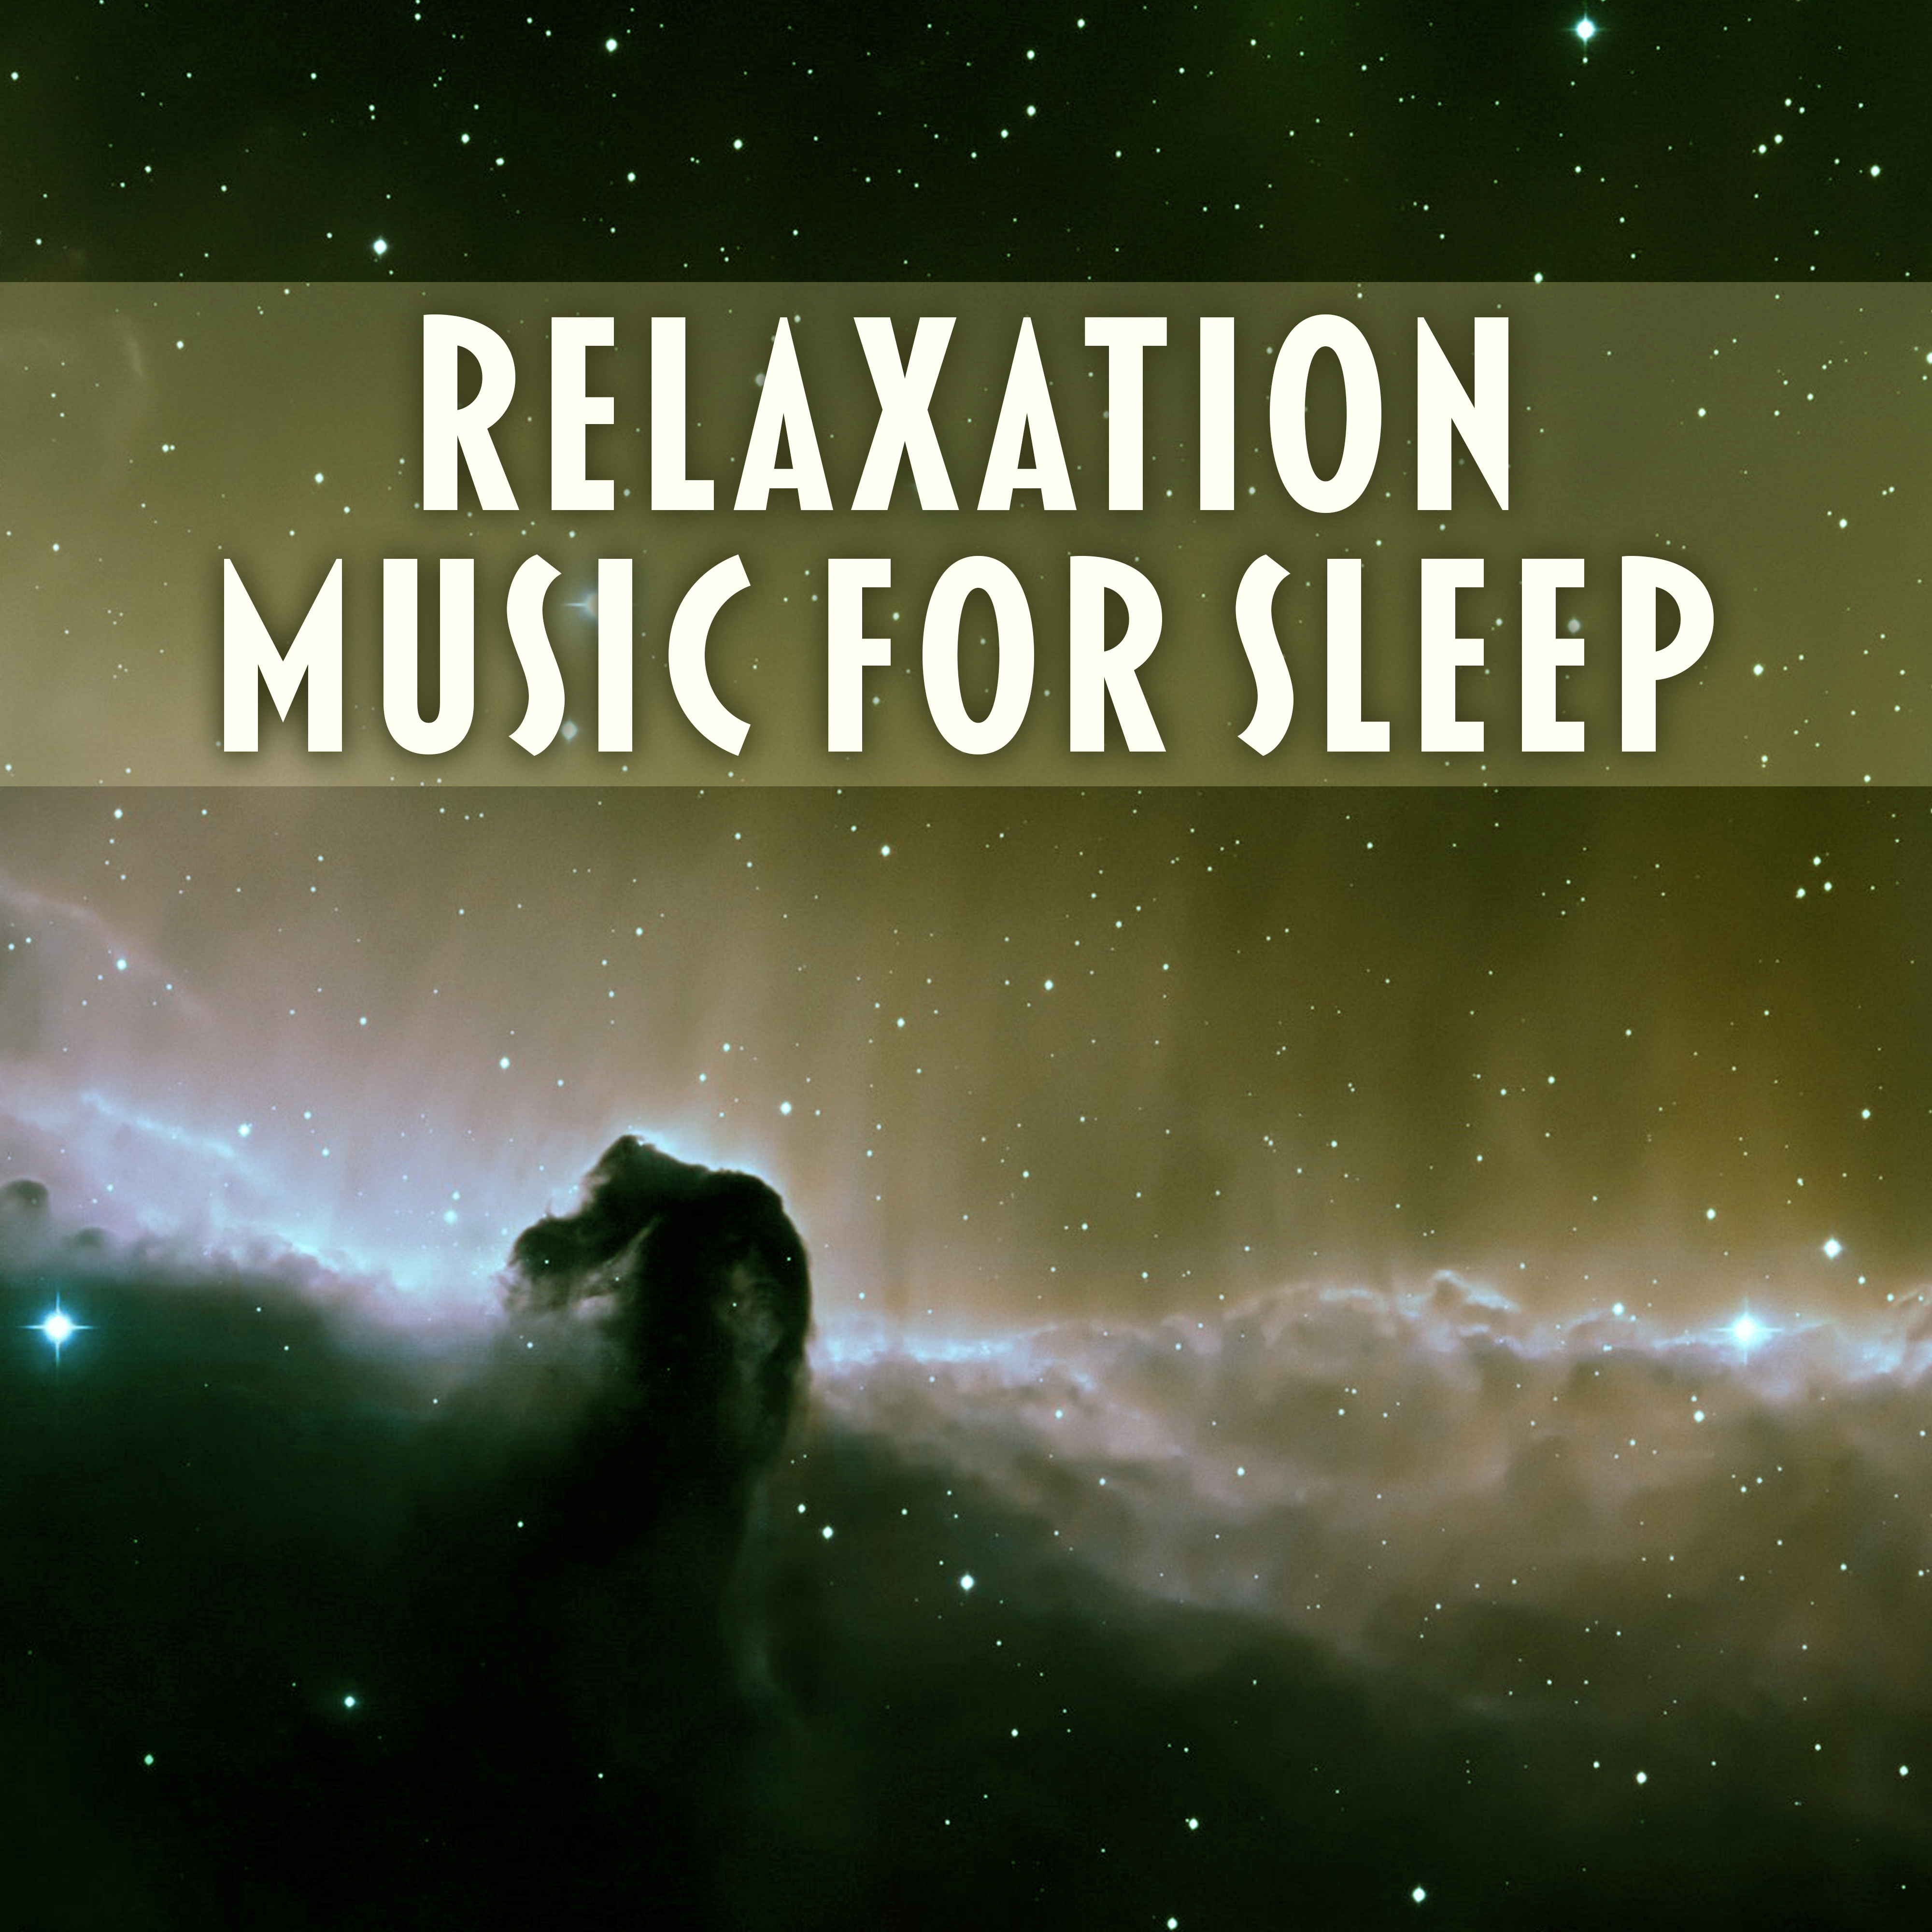 Relaxation Music for Sleep  Calming Nature Music, New Age, Helpful for Falling Asleep